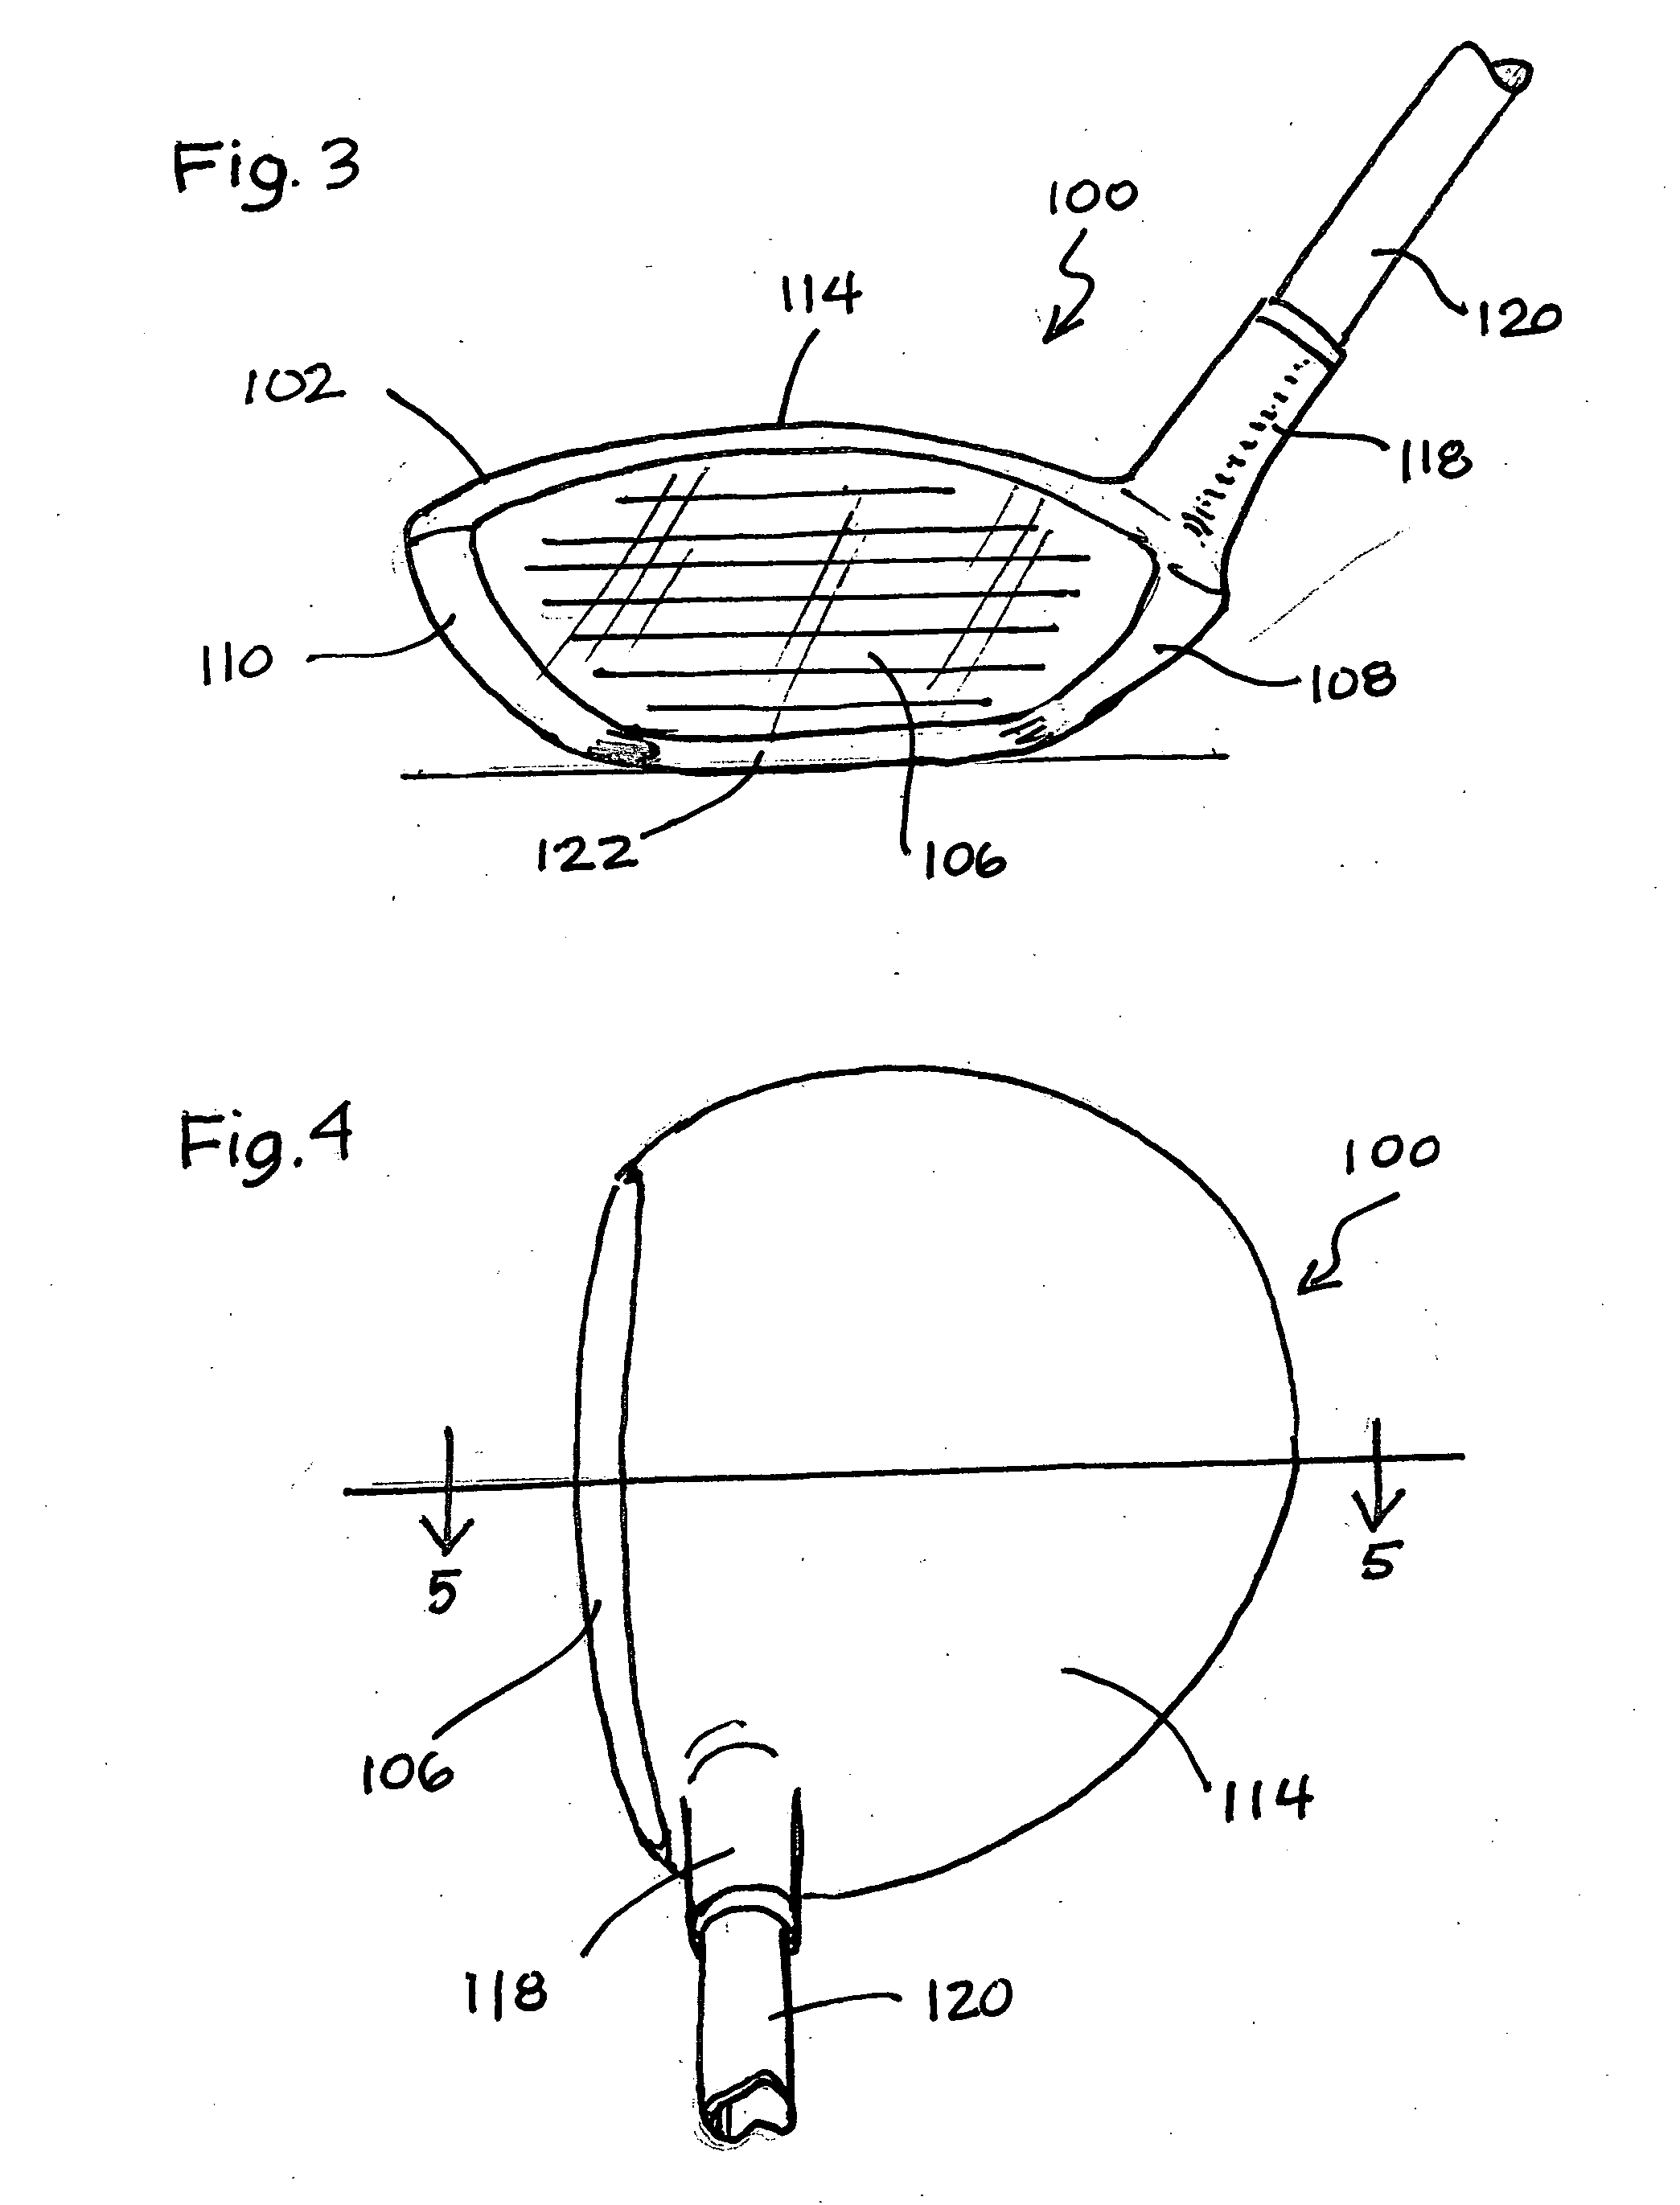 Sole configuration for metal wood golf club